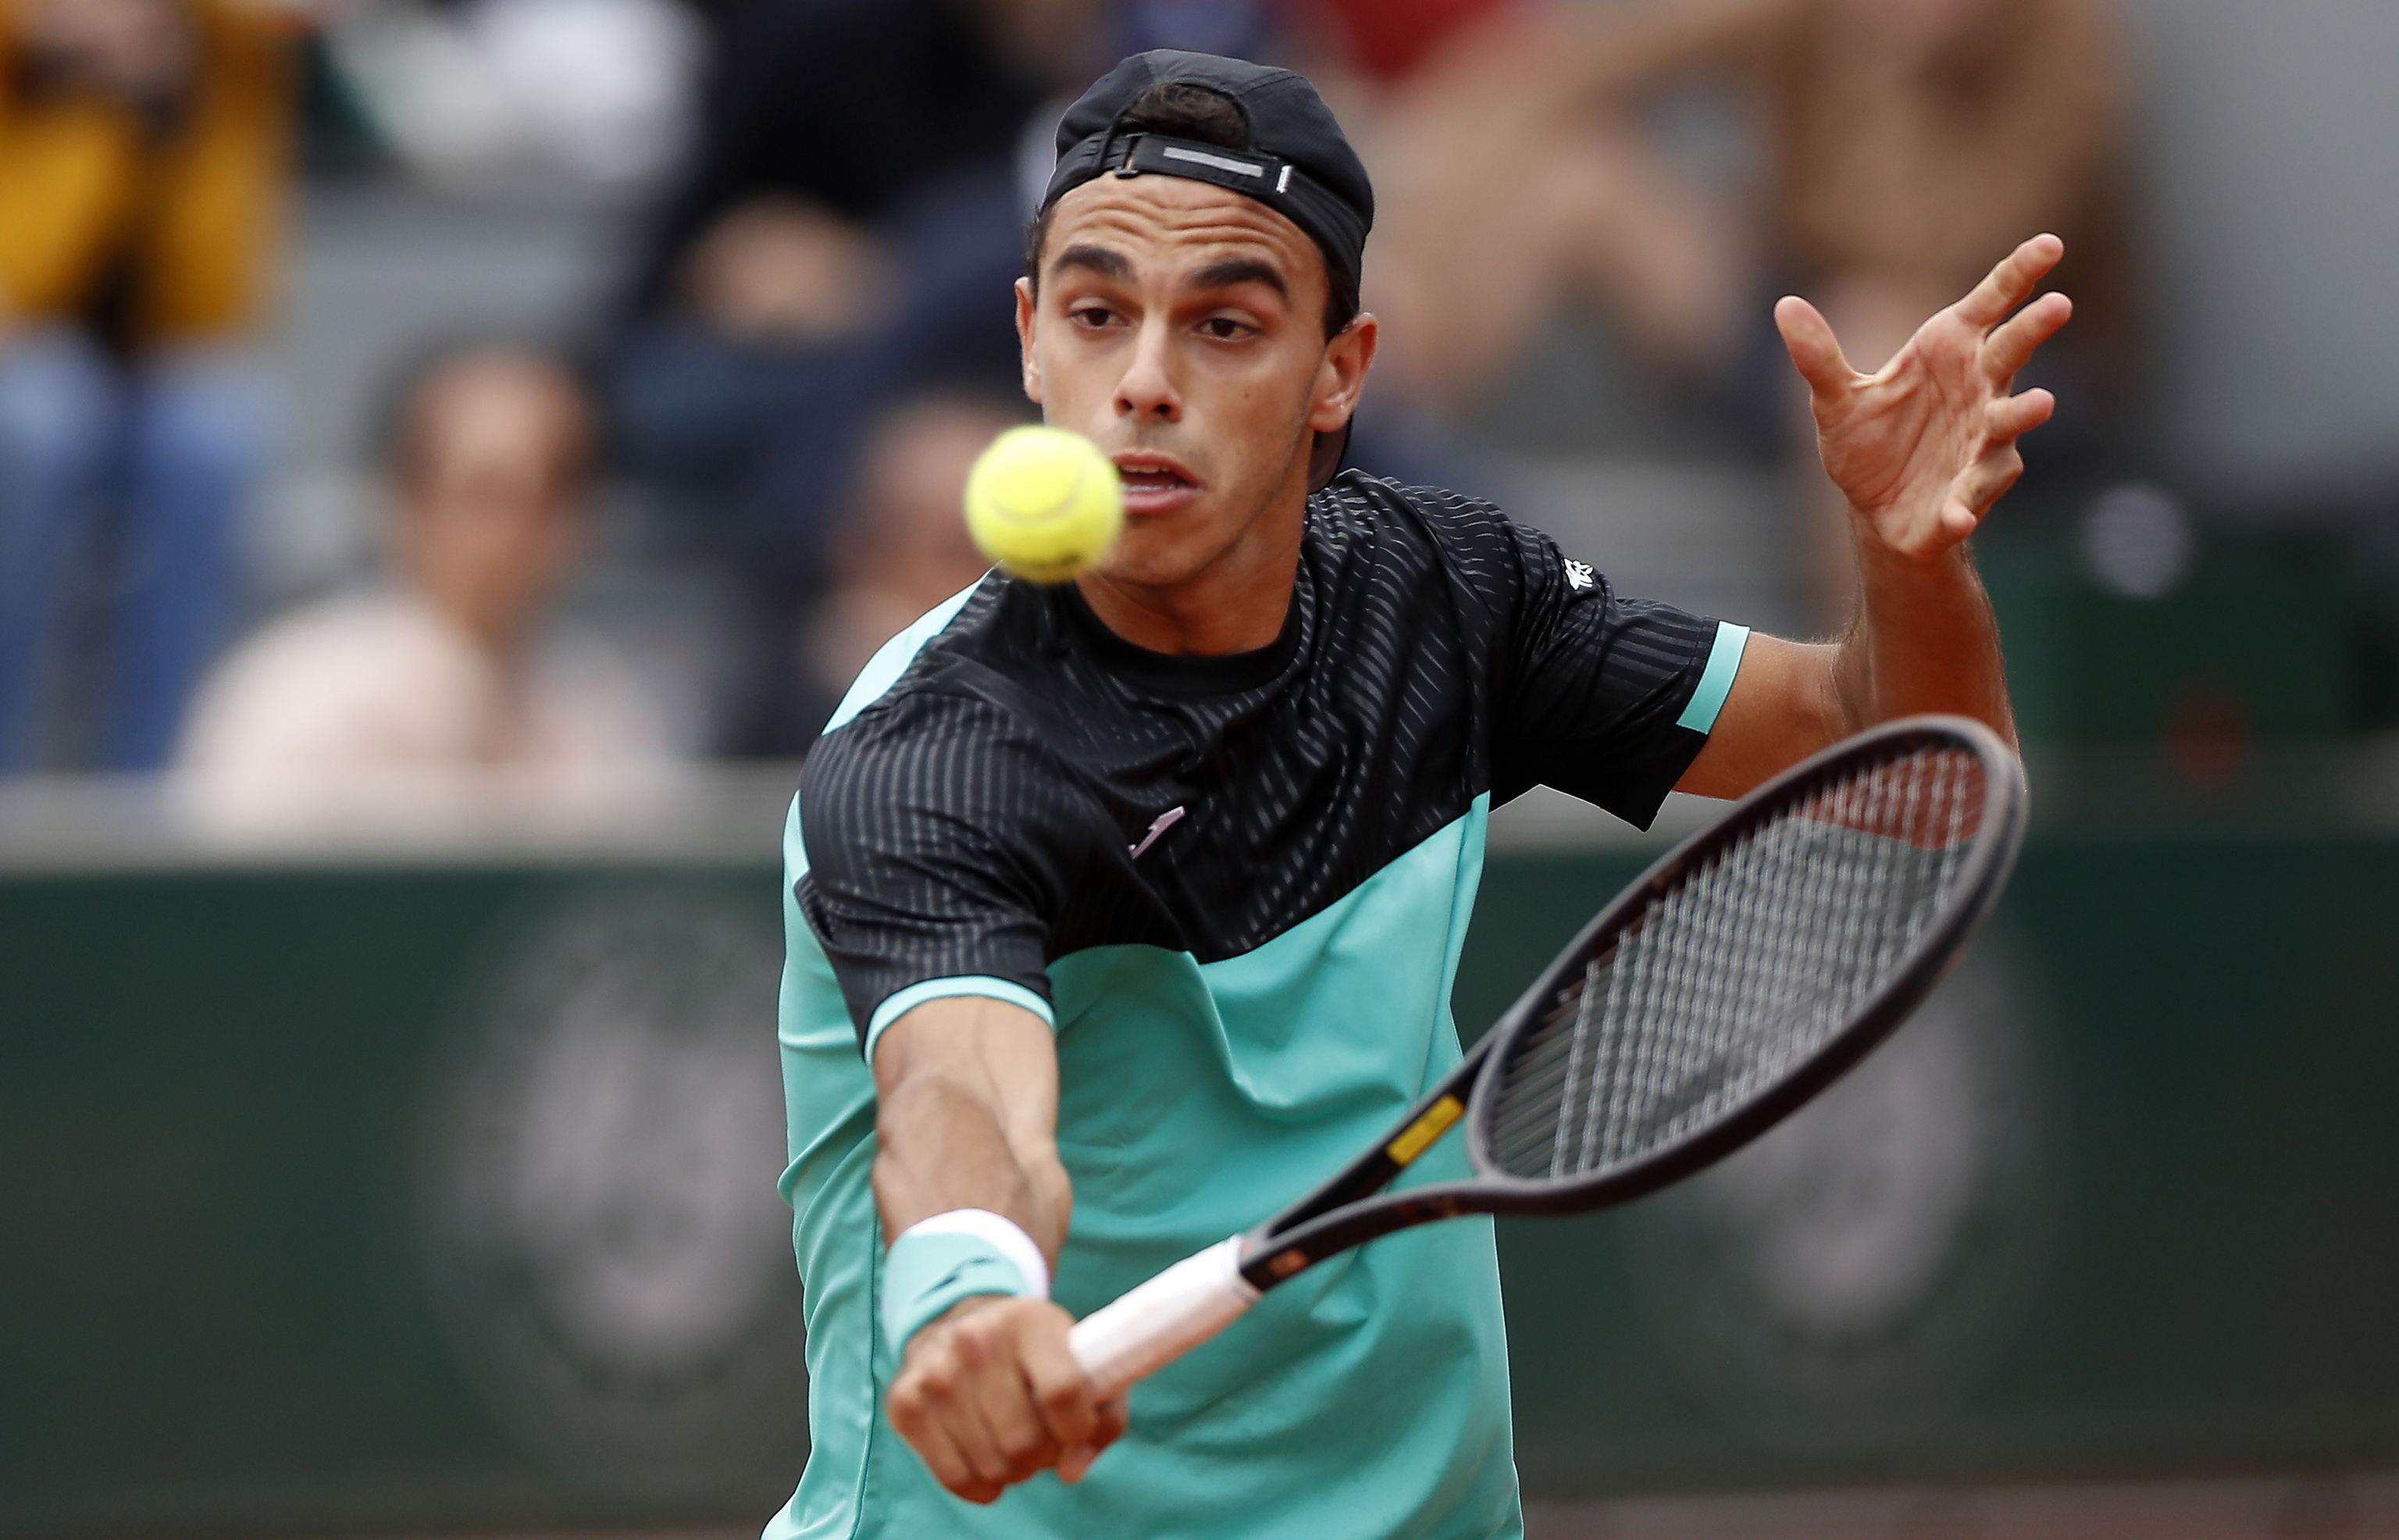 Paris (France), 23/05/2022.- Francisco lt;HIT gt;  Cerundolo lt;/HIT gt;  Daniel Evans of Argentina plays in his men's first round match during the French Open tennis tournament at Roland Garros on May 23, 2022 in Paris, France.  (Tennis, Eberto, Francia, Reino Unido)